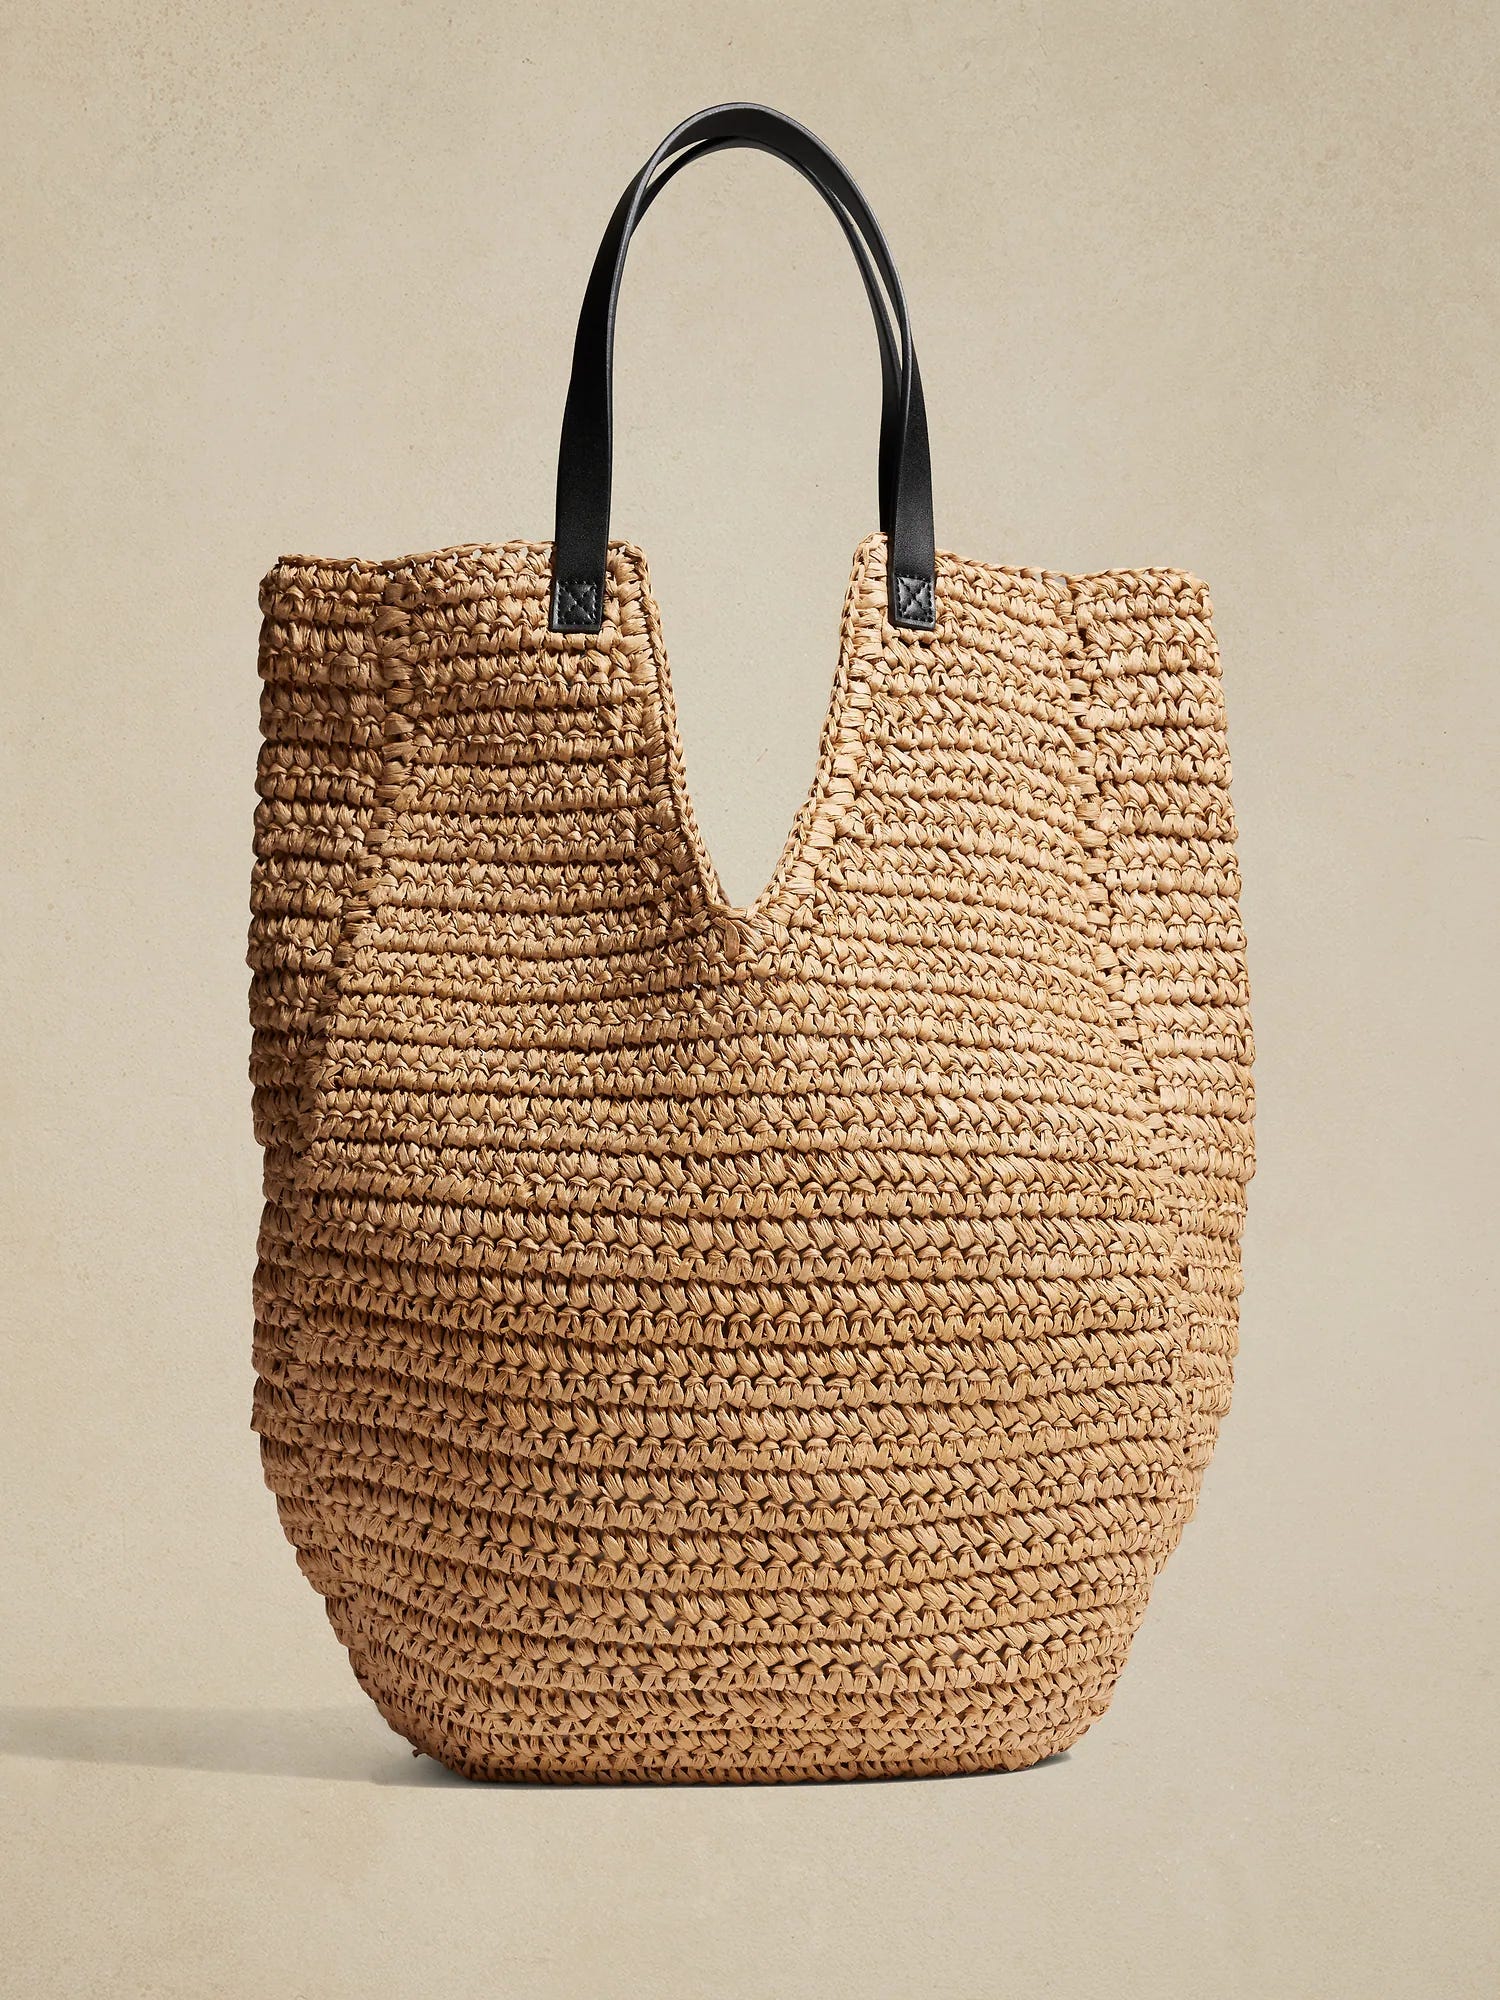 The Straw Bag I've Carried All Summer